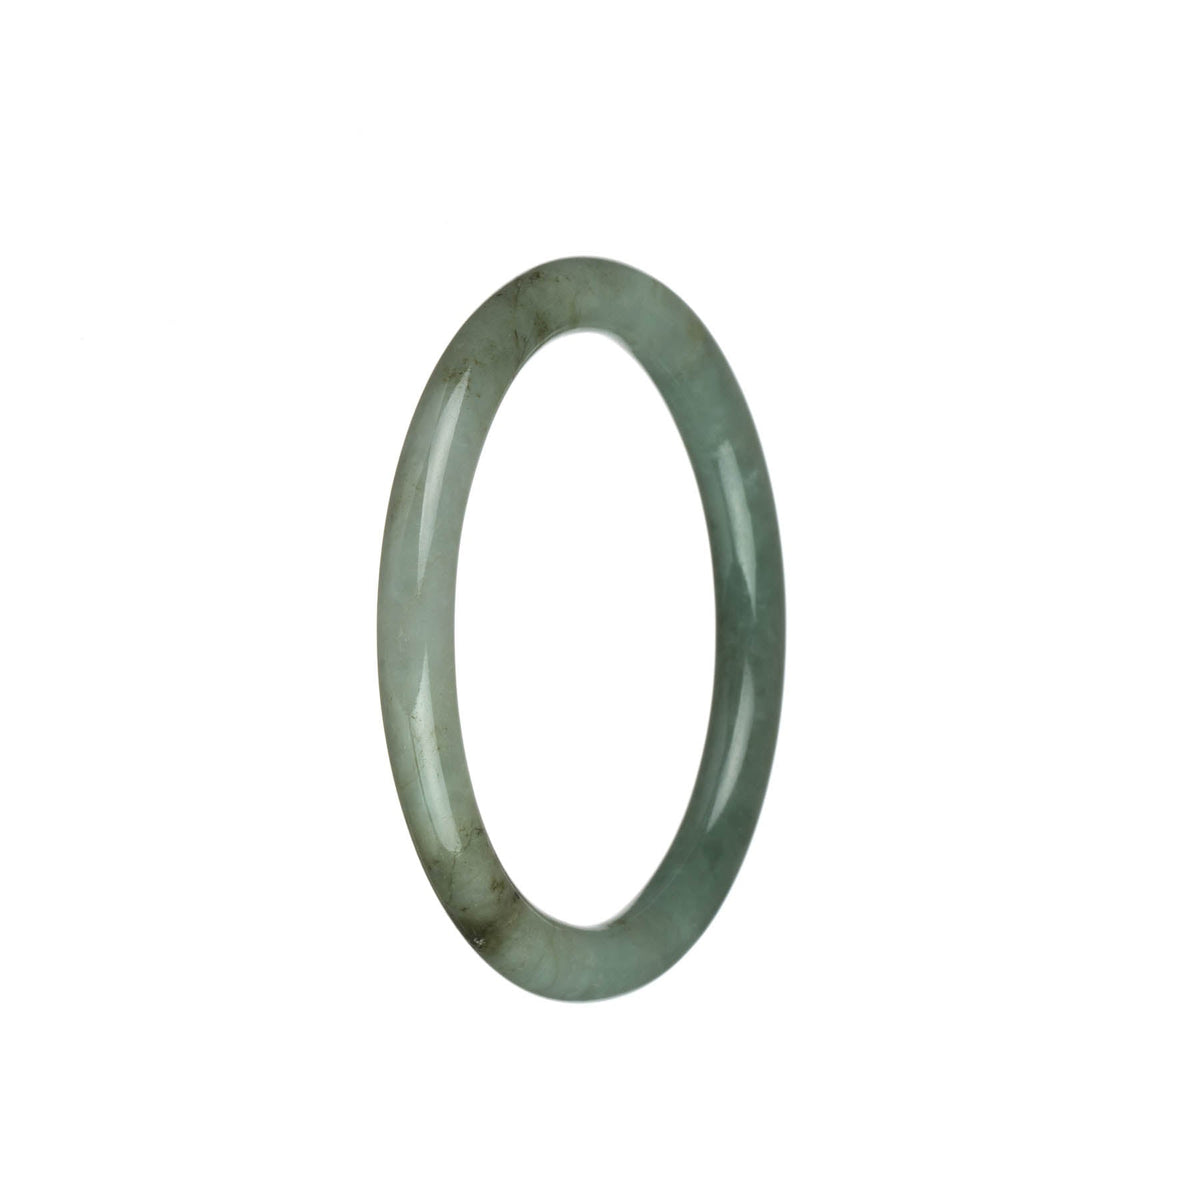 A close-up image of a delicate green jade bangle with a pale green hue. The bangle is round in shape and has a petite size of 57mm. It is a genuine Type A jade, sourced from MAYS GEMS.